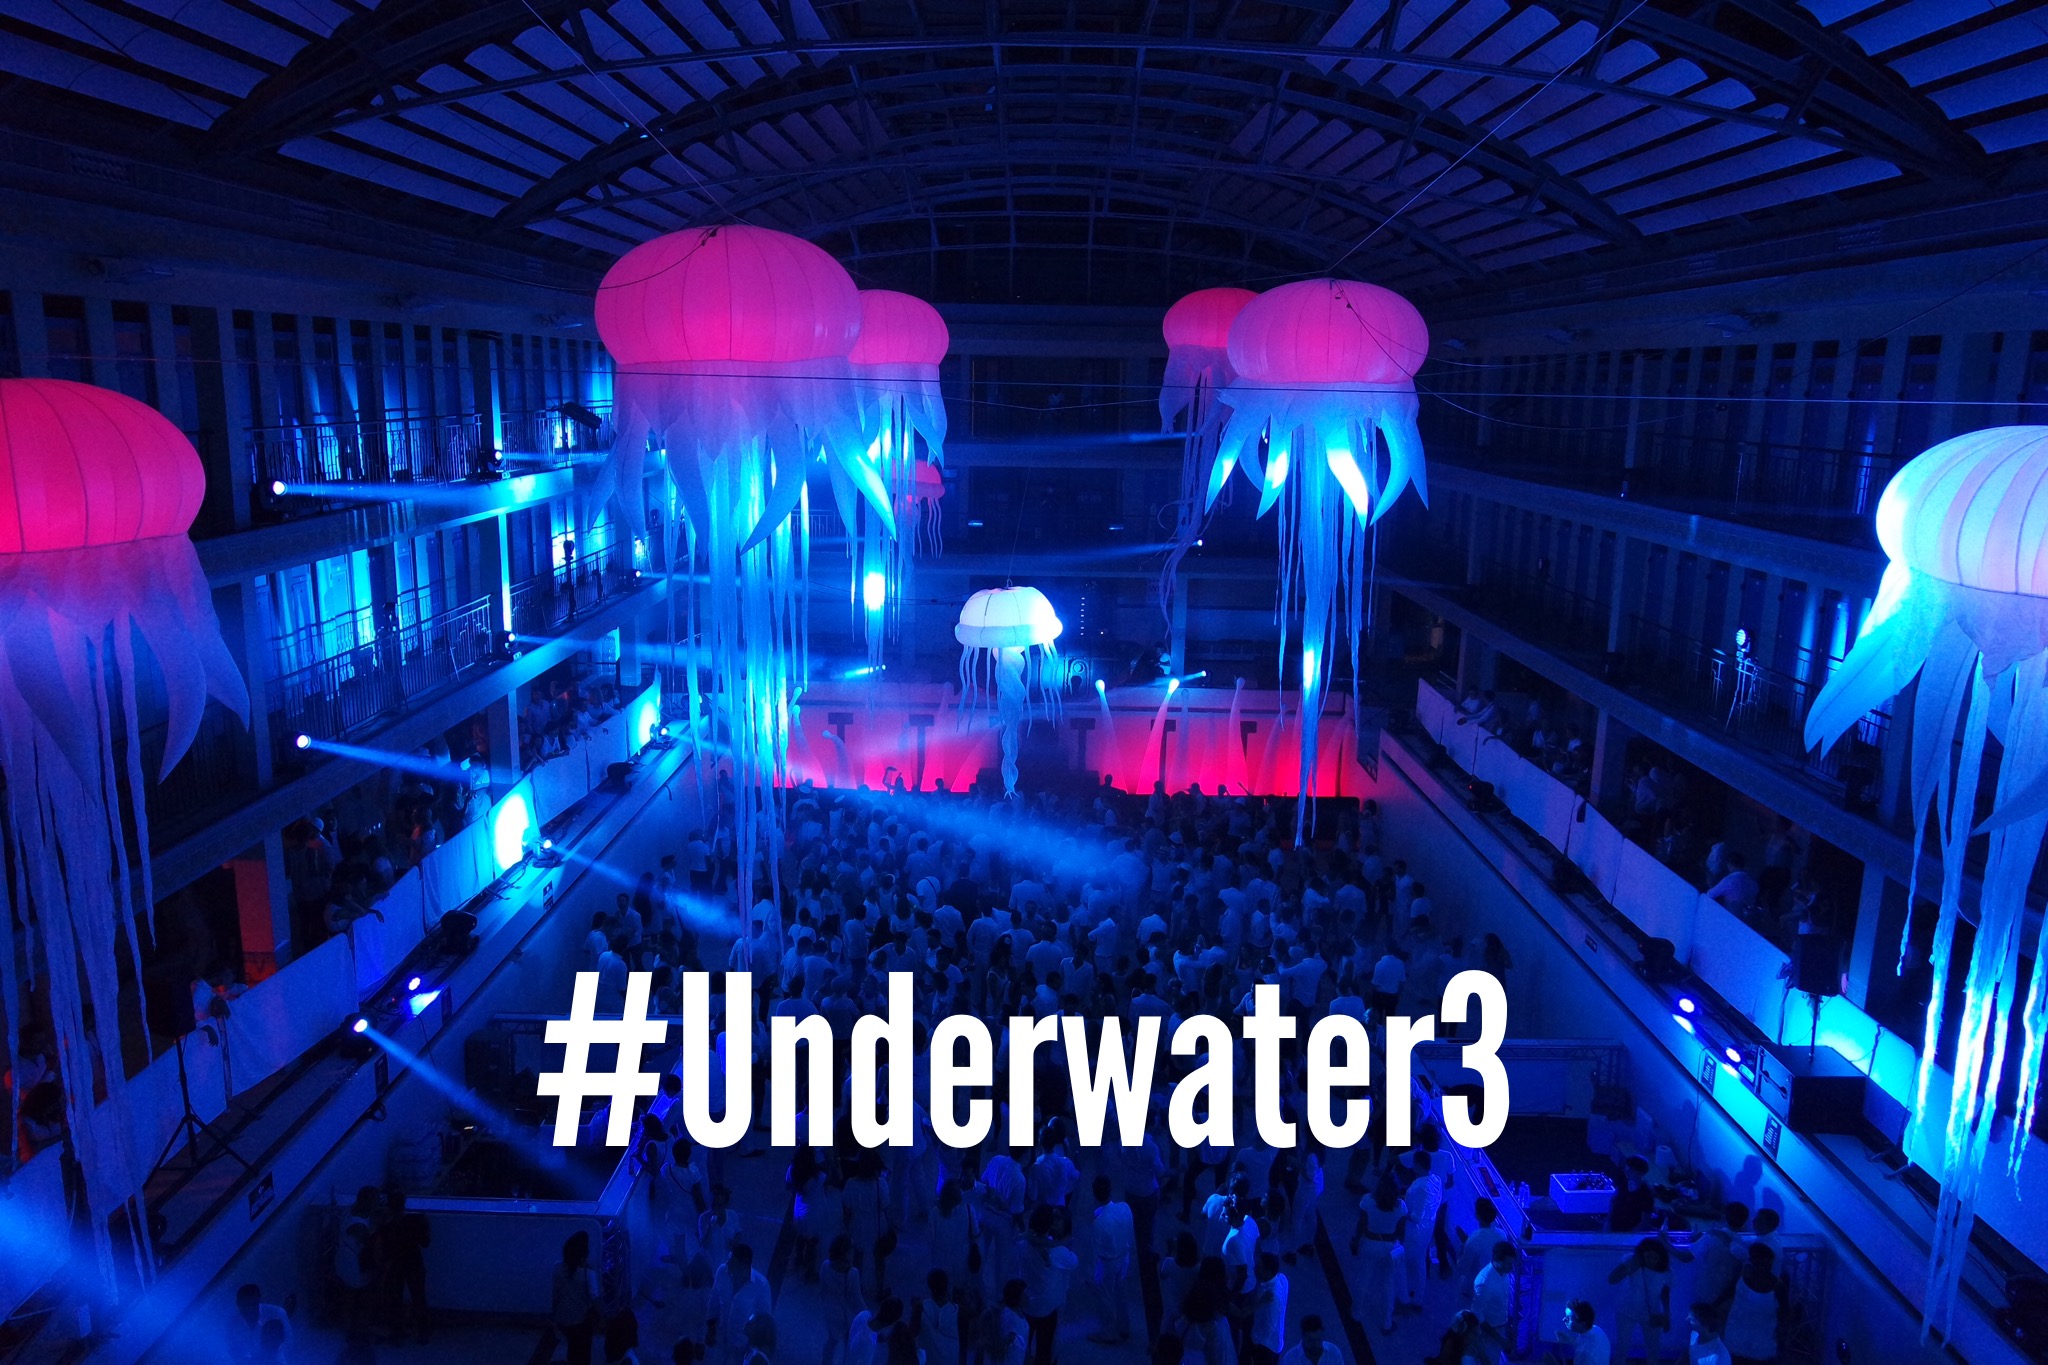 Underwater 3 the light bath par Agence Wato we are the oracle piscine pailleron 28 et 29 août 2015 swimming pool party night photo by united states of paris blog